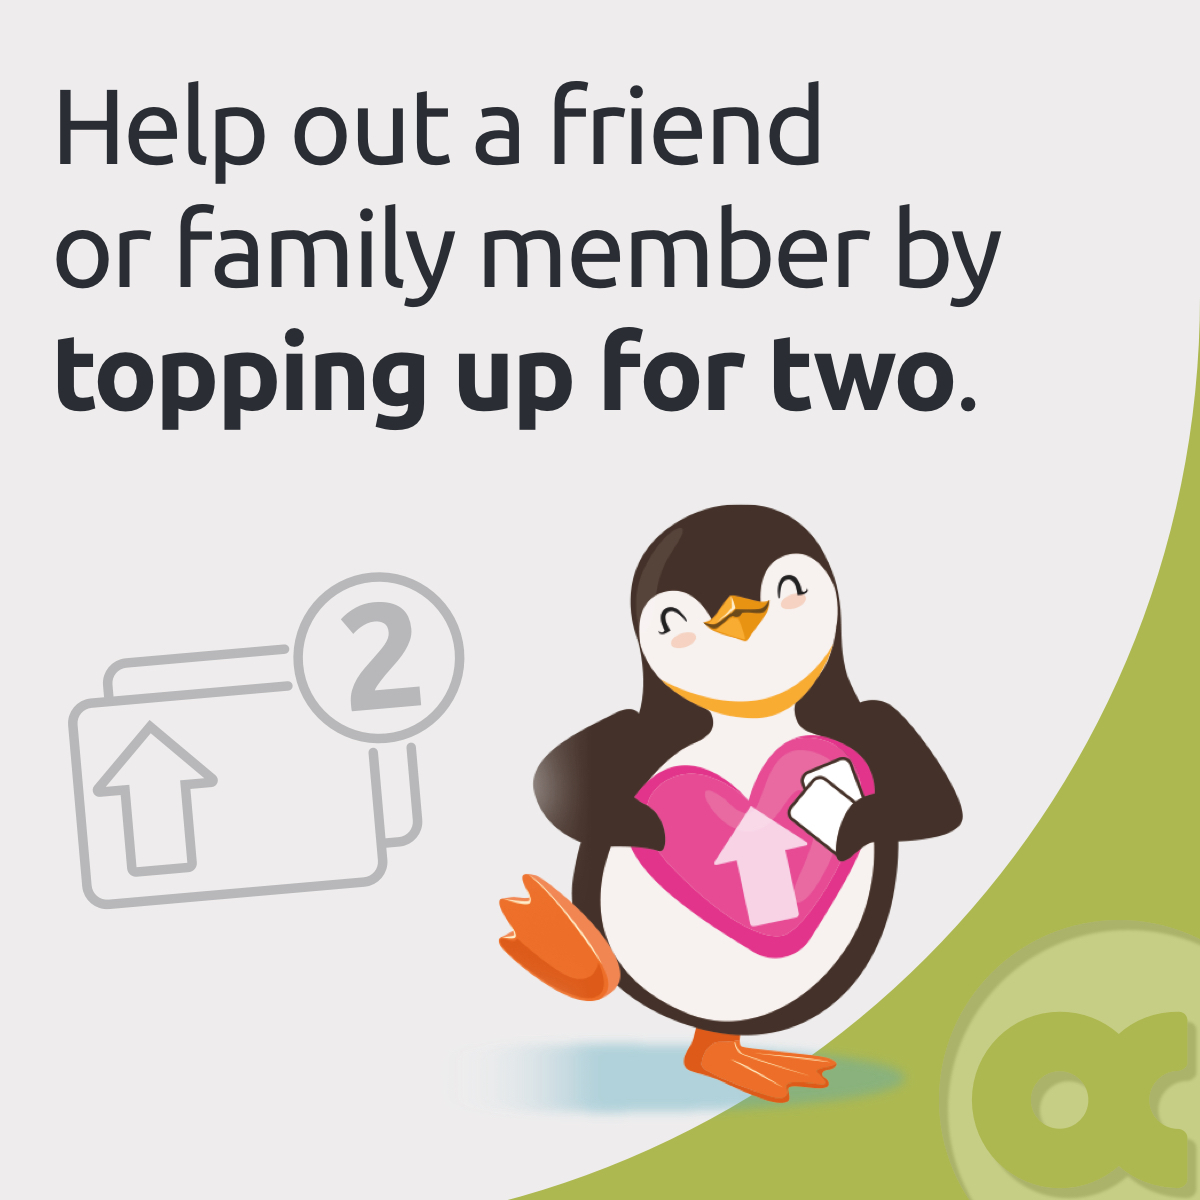 It can be difficult for some people to leave the house and top up or pay their bills. So, if you are topping up, why not help out a friend, family member or neighbour & top up for them too the next time you visit your local Payzone store. #topupfortwo #payzone